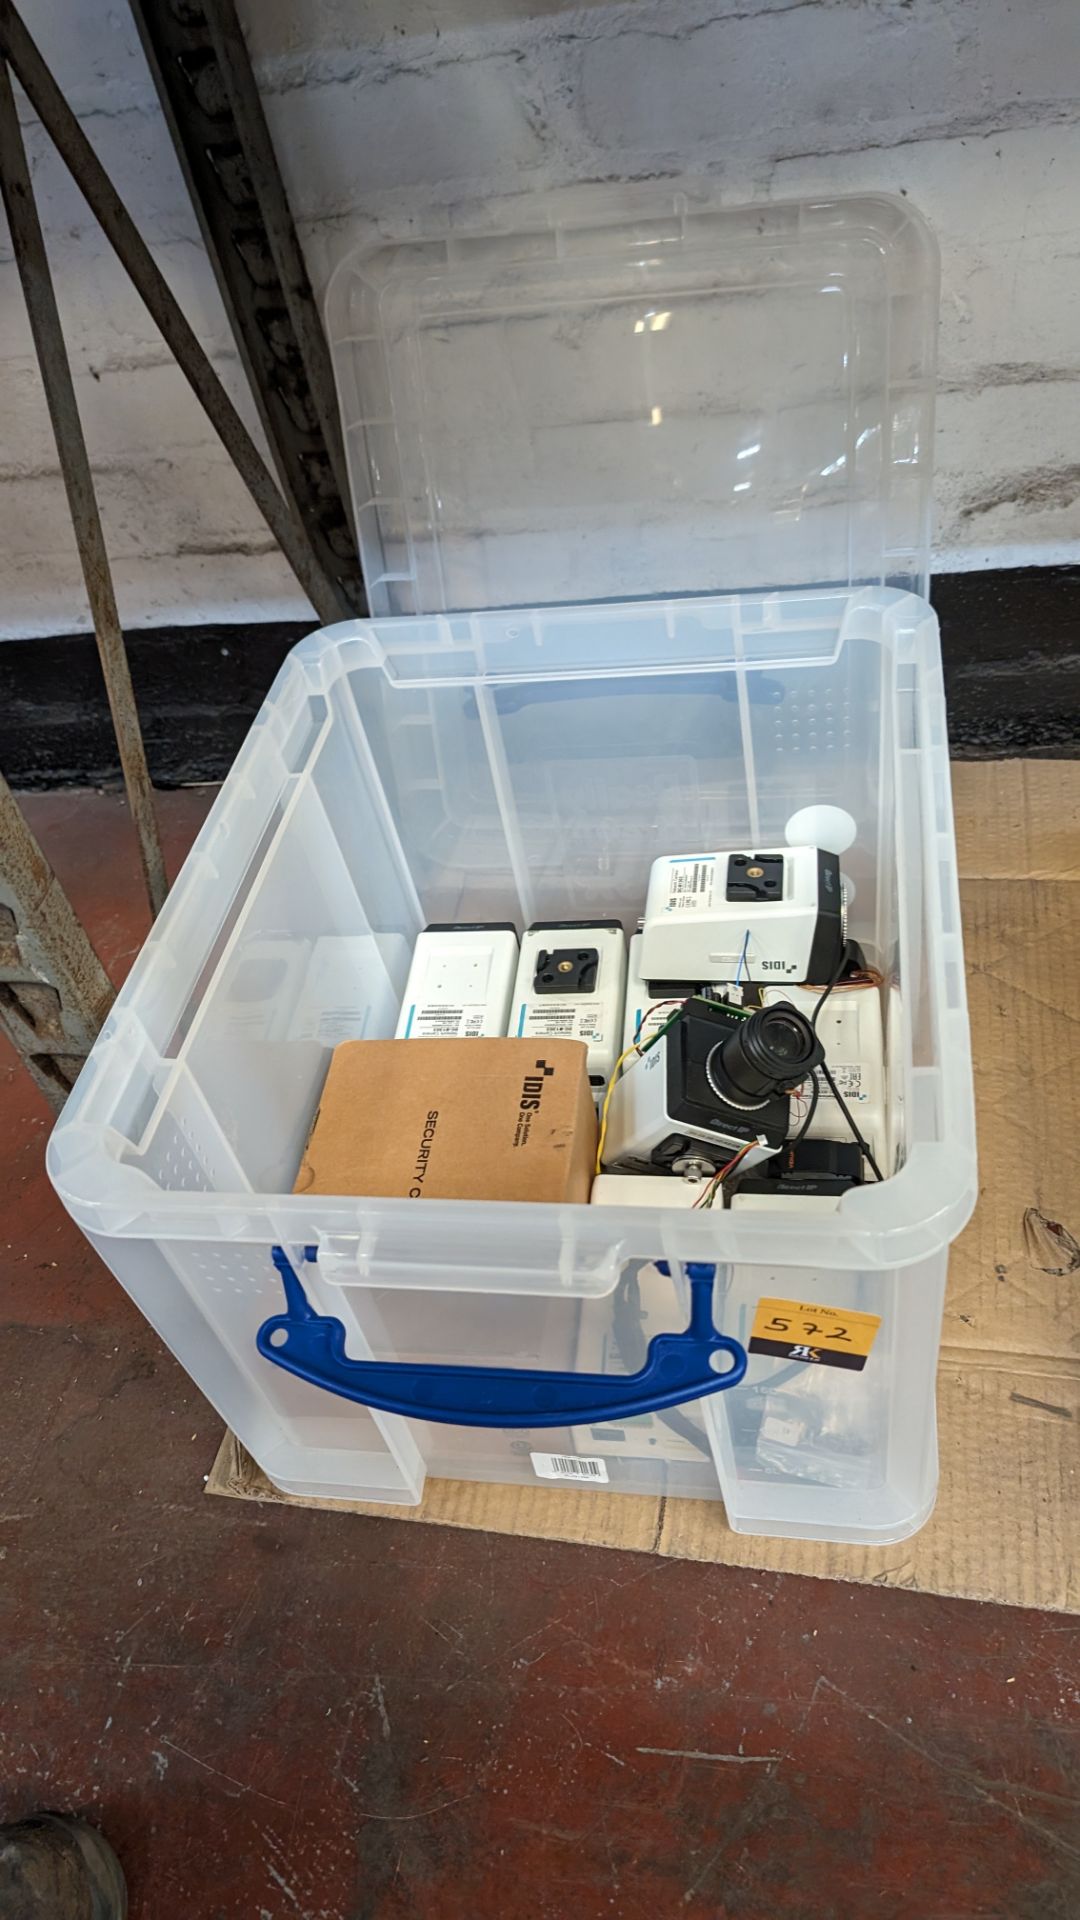 The contents of a crate of CCTV cameras and similar